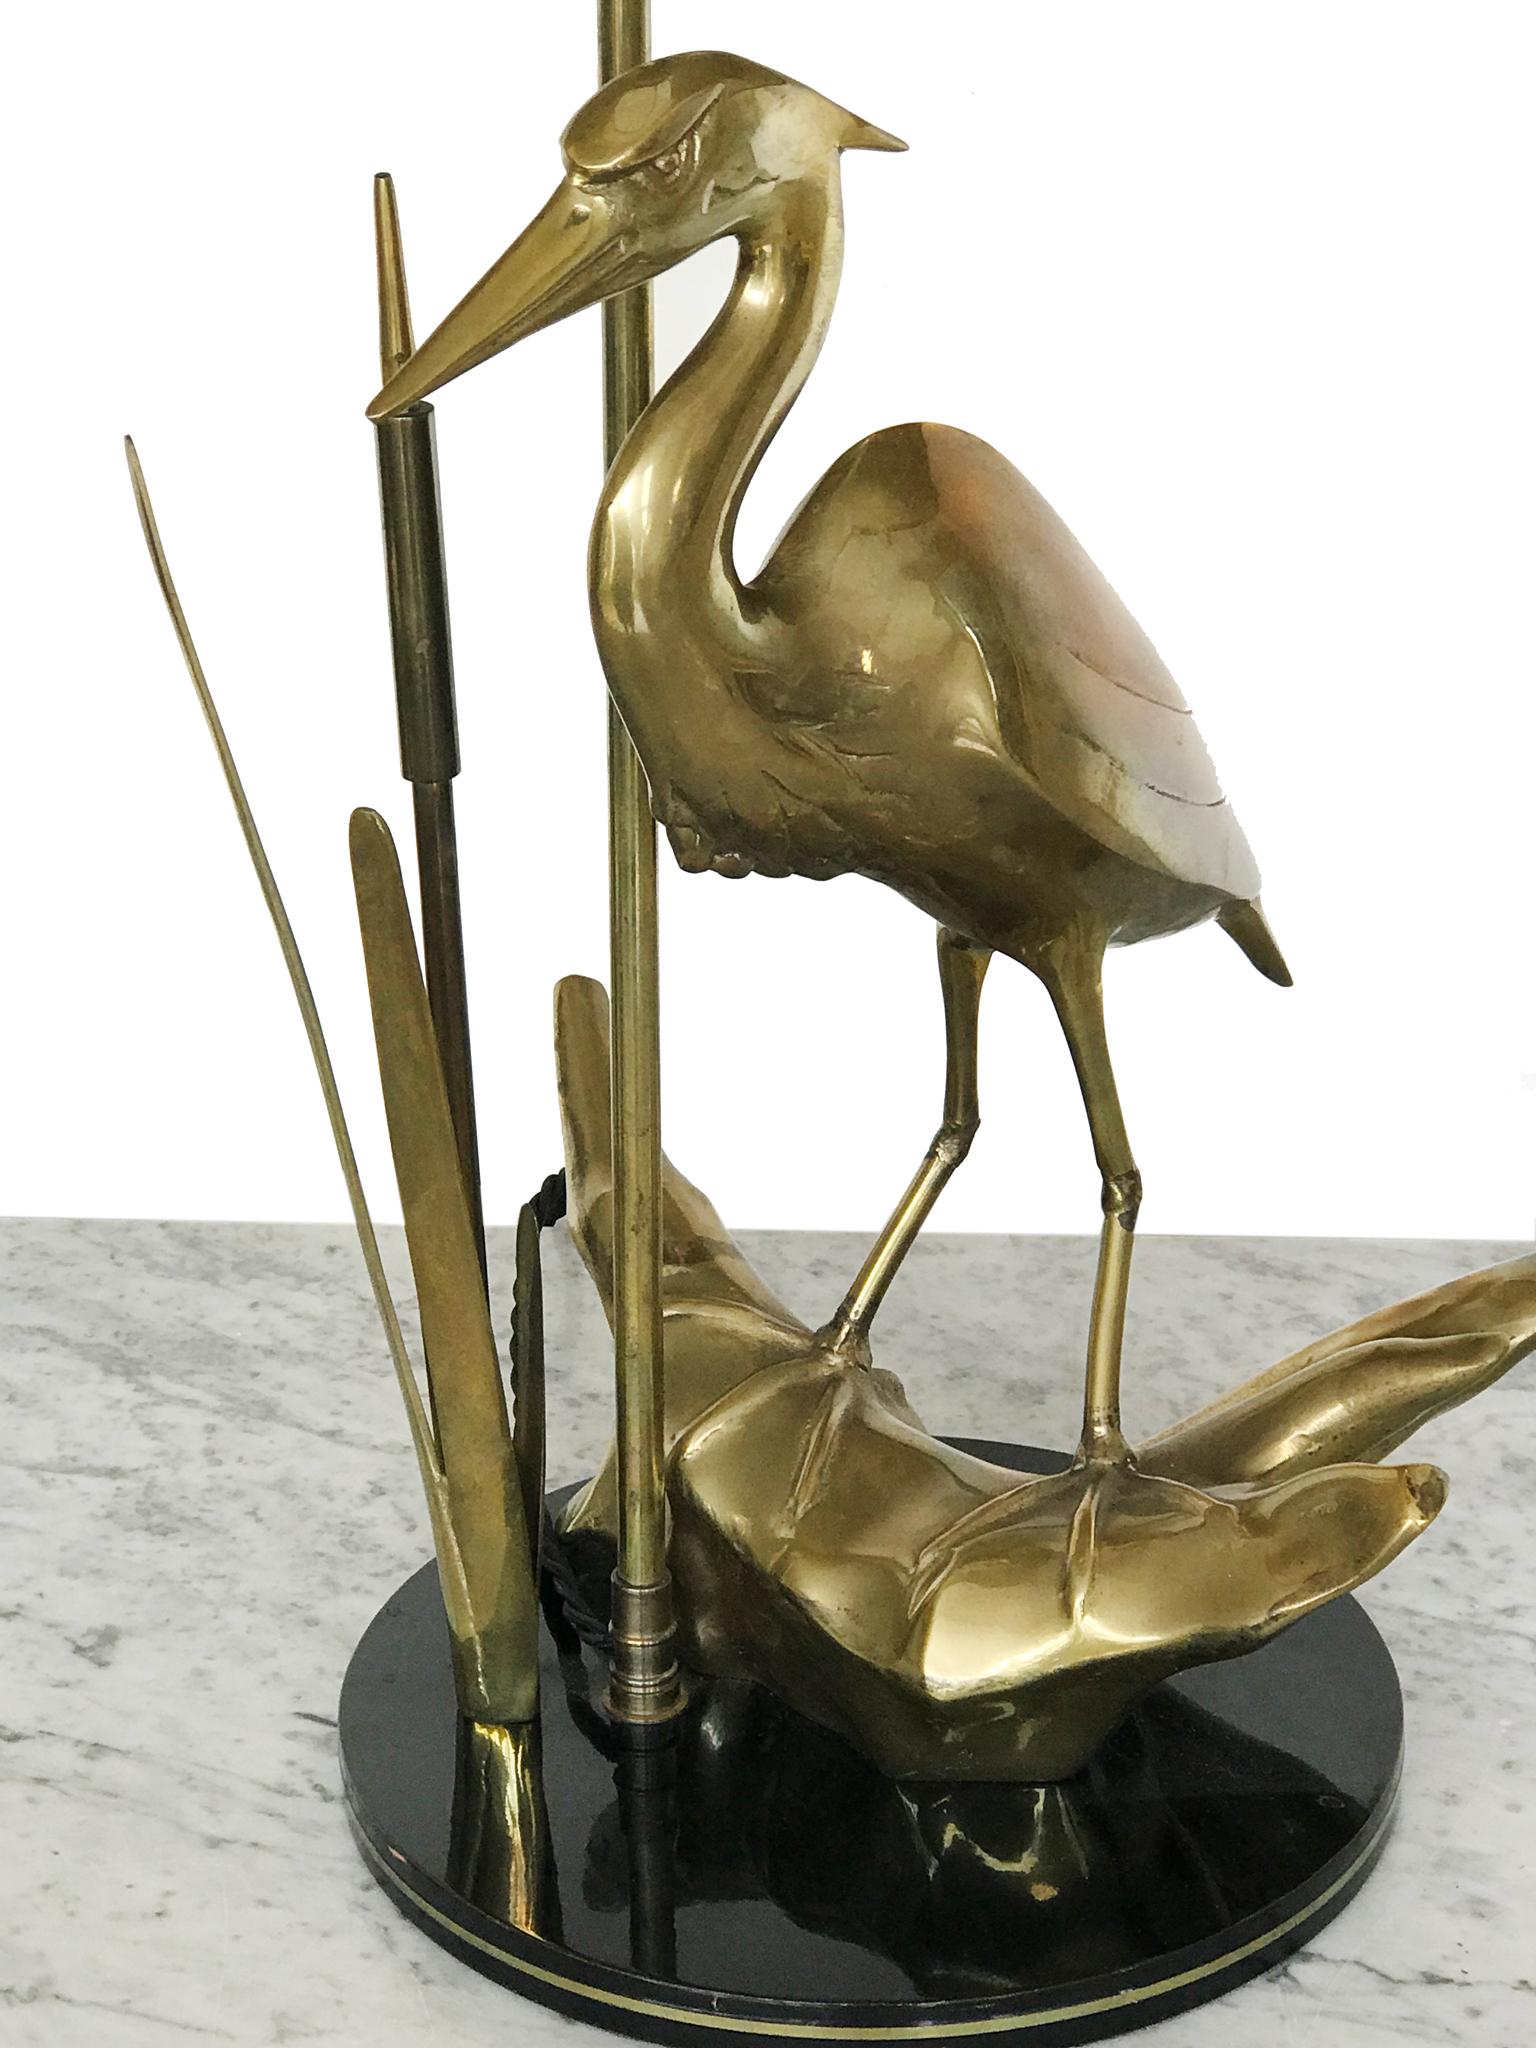 MIDCENTURY SCULPTURAL LAMP in Brass with Heron 1969 Hollywood Regency Style 1